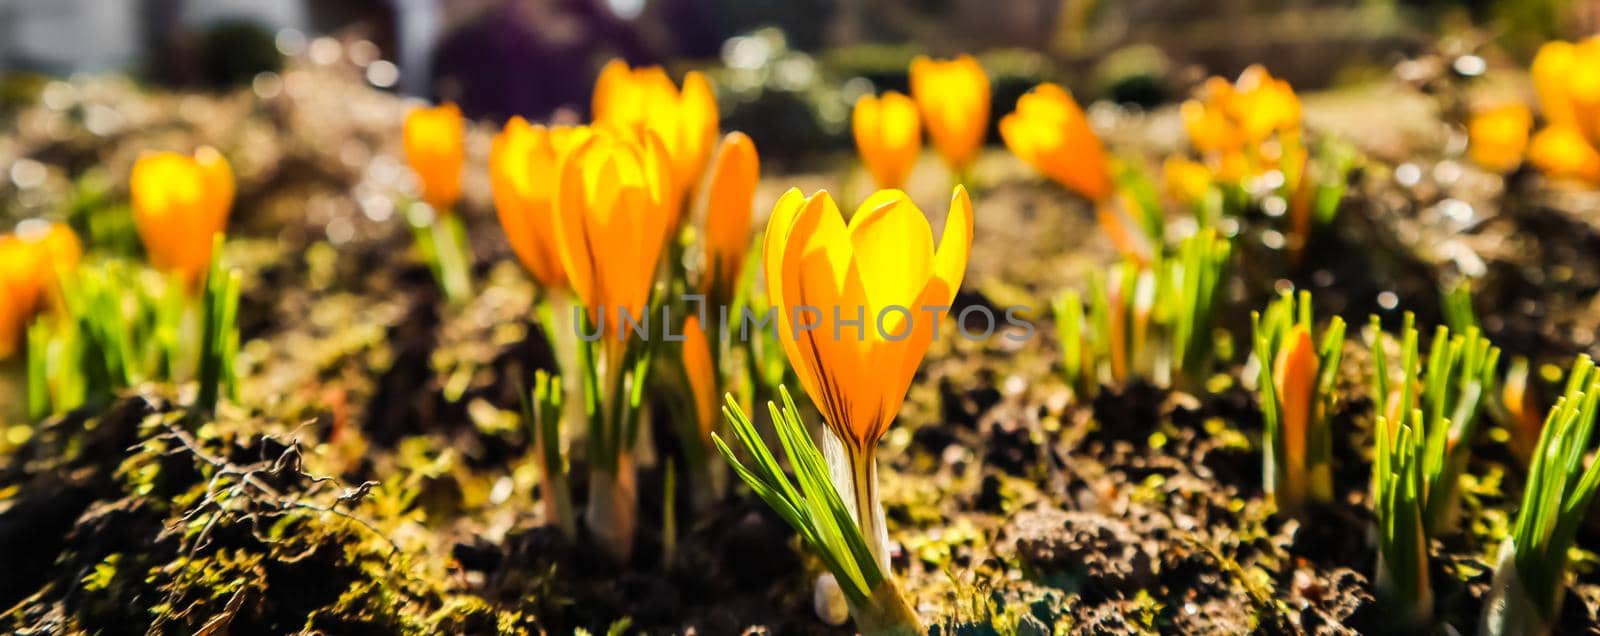 Spring is coming. The first yellow crocuses in my garden on a sunny day by Olayola